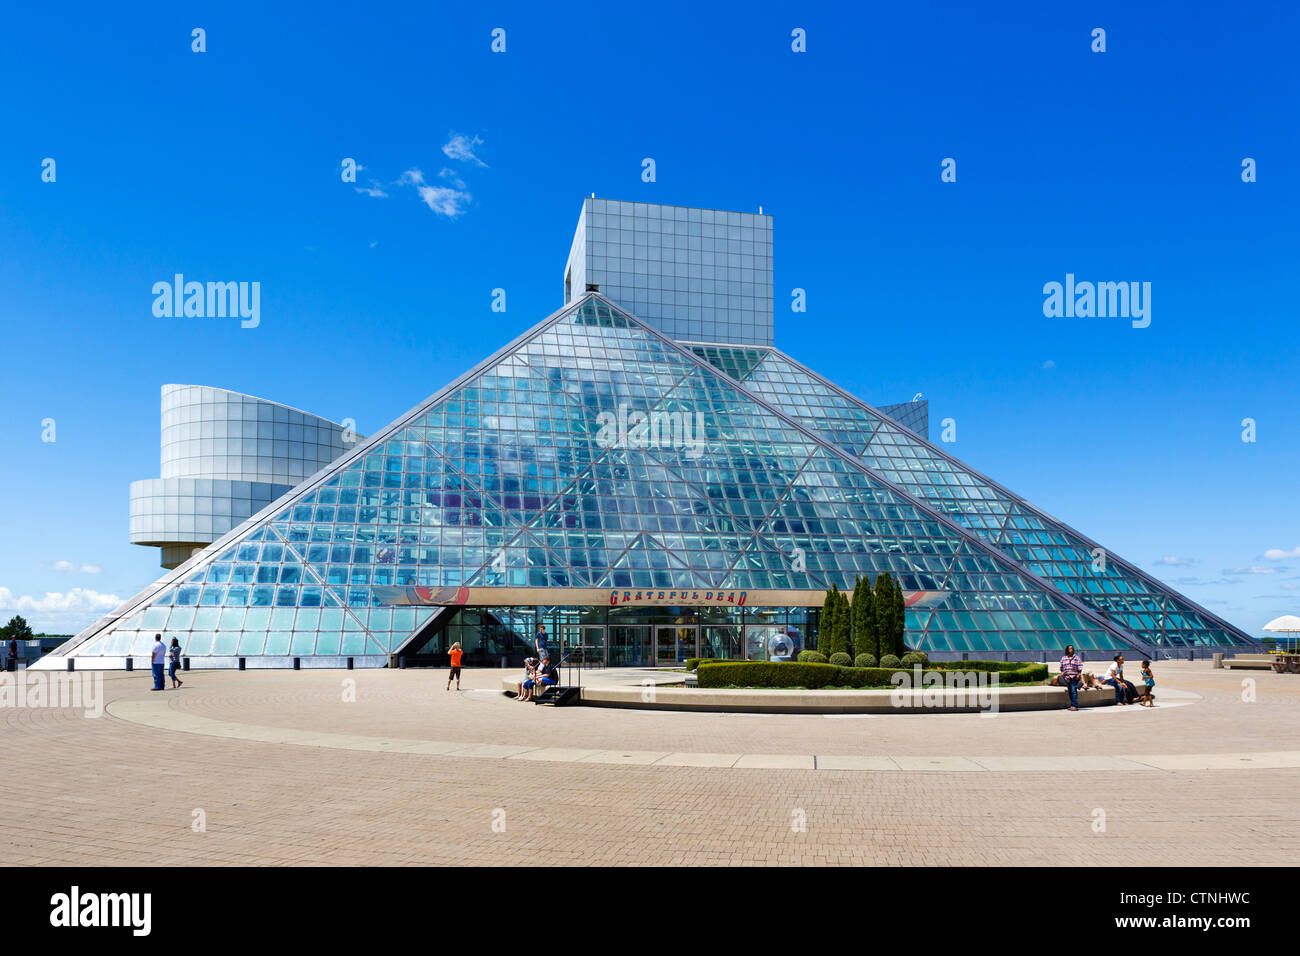 Die Rock And Roll Hall Of Fame Museum am Ufer des Lake Erie, North Coast Harbor, Cleveland, Ohio, USA Stockfoto